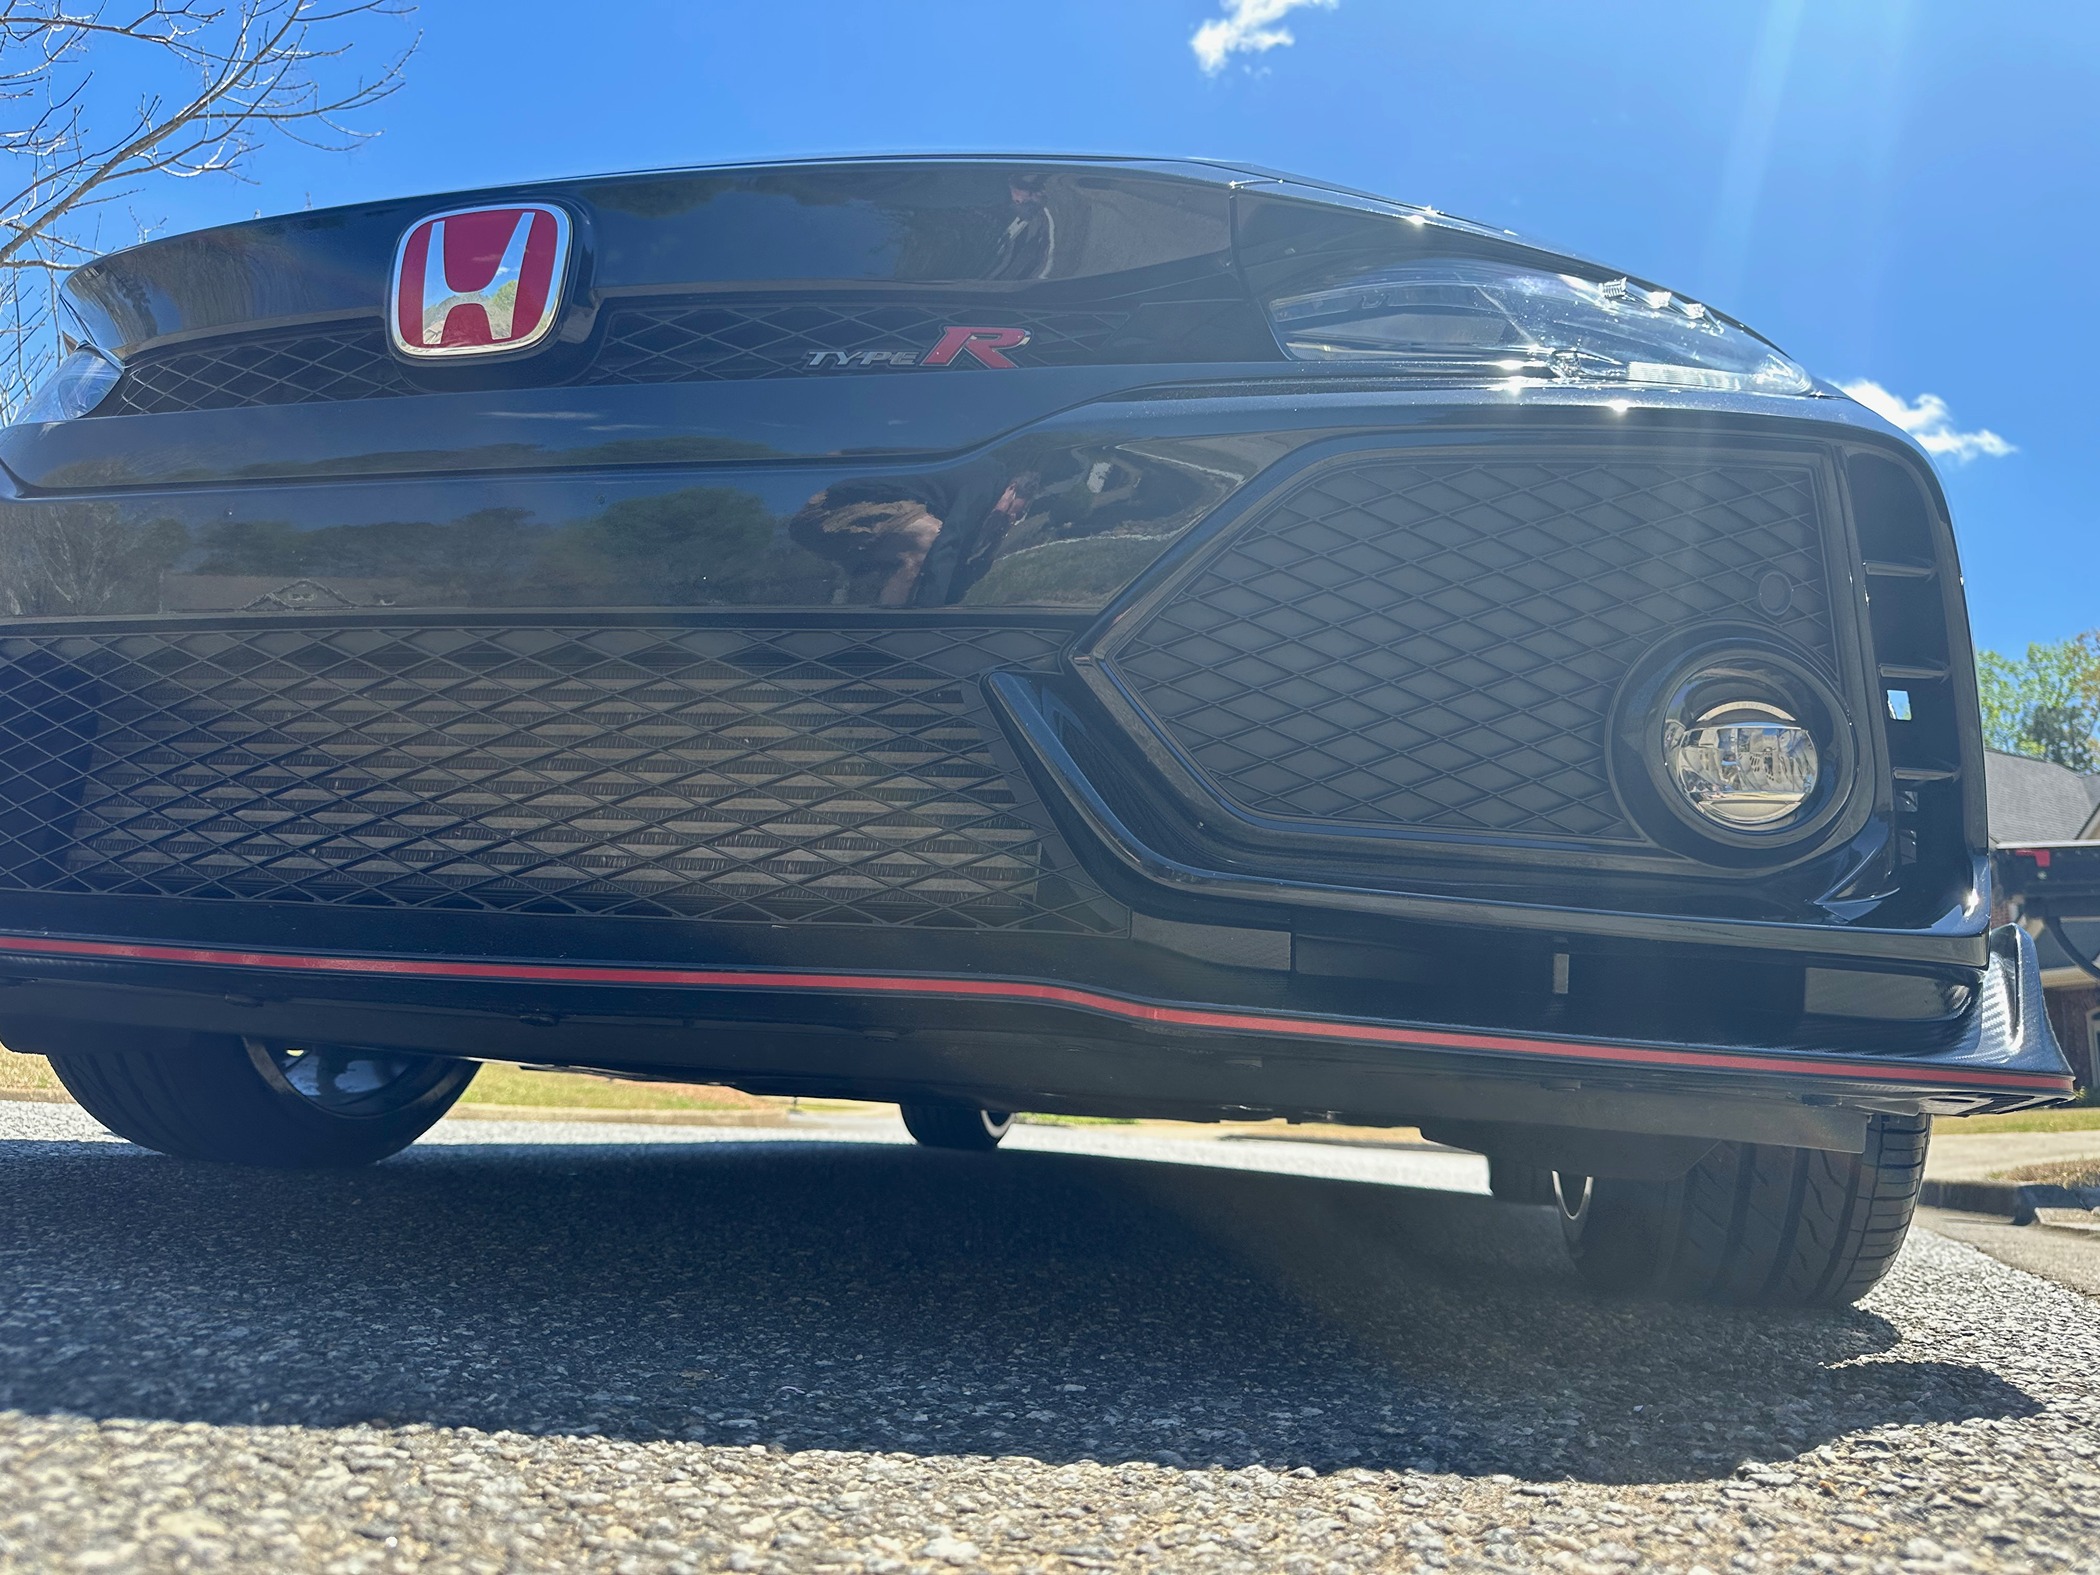 Honda Civic 10th gen Sold. 2019 Civic Type R for sale IMG_8152